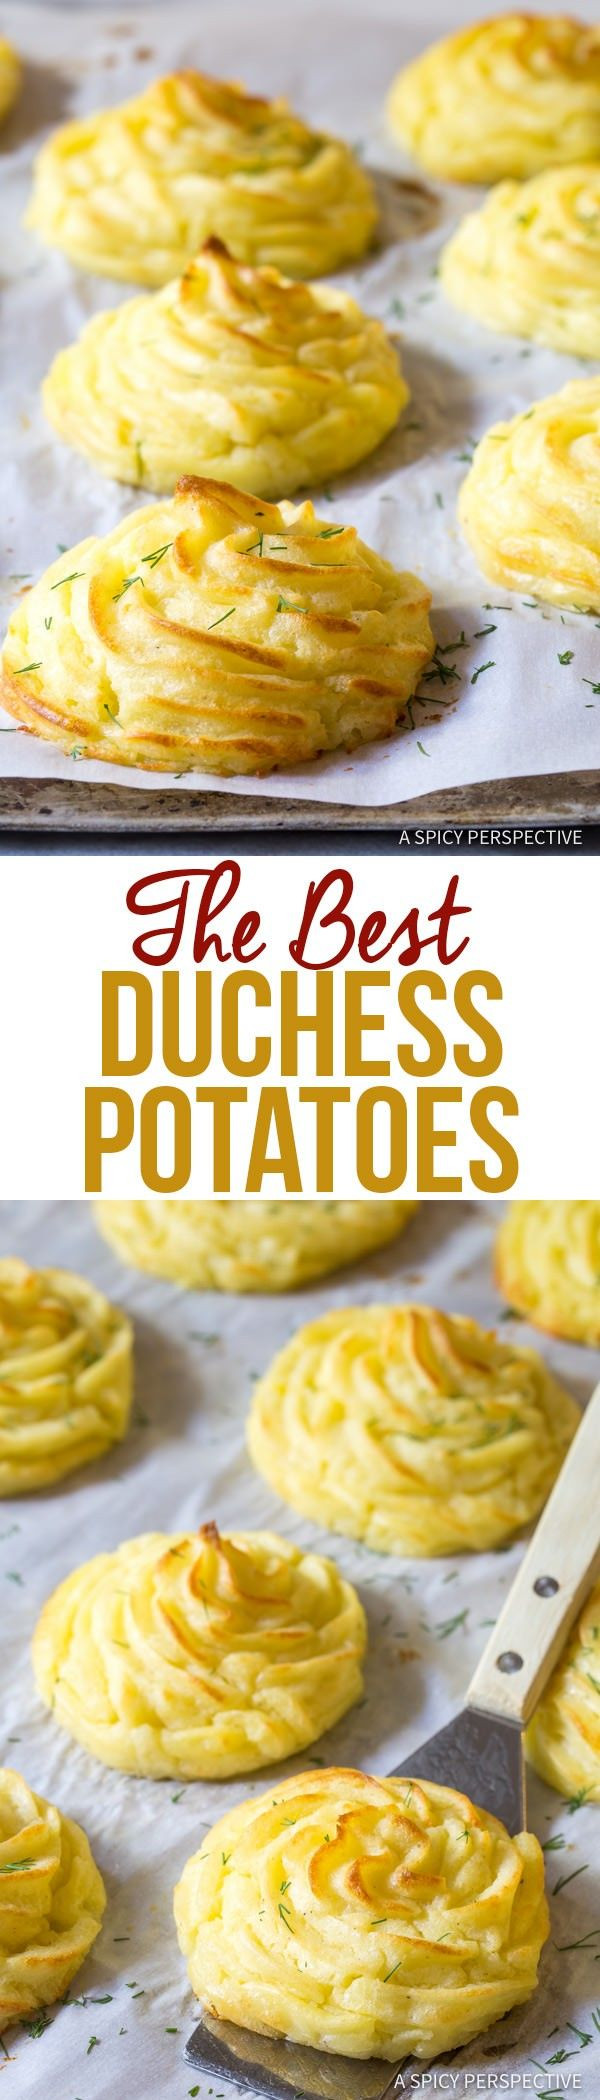 Cheap Thanksgiving Side Dishes
 Best 25 Cheap side dishes ideas on Pinterest